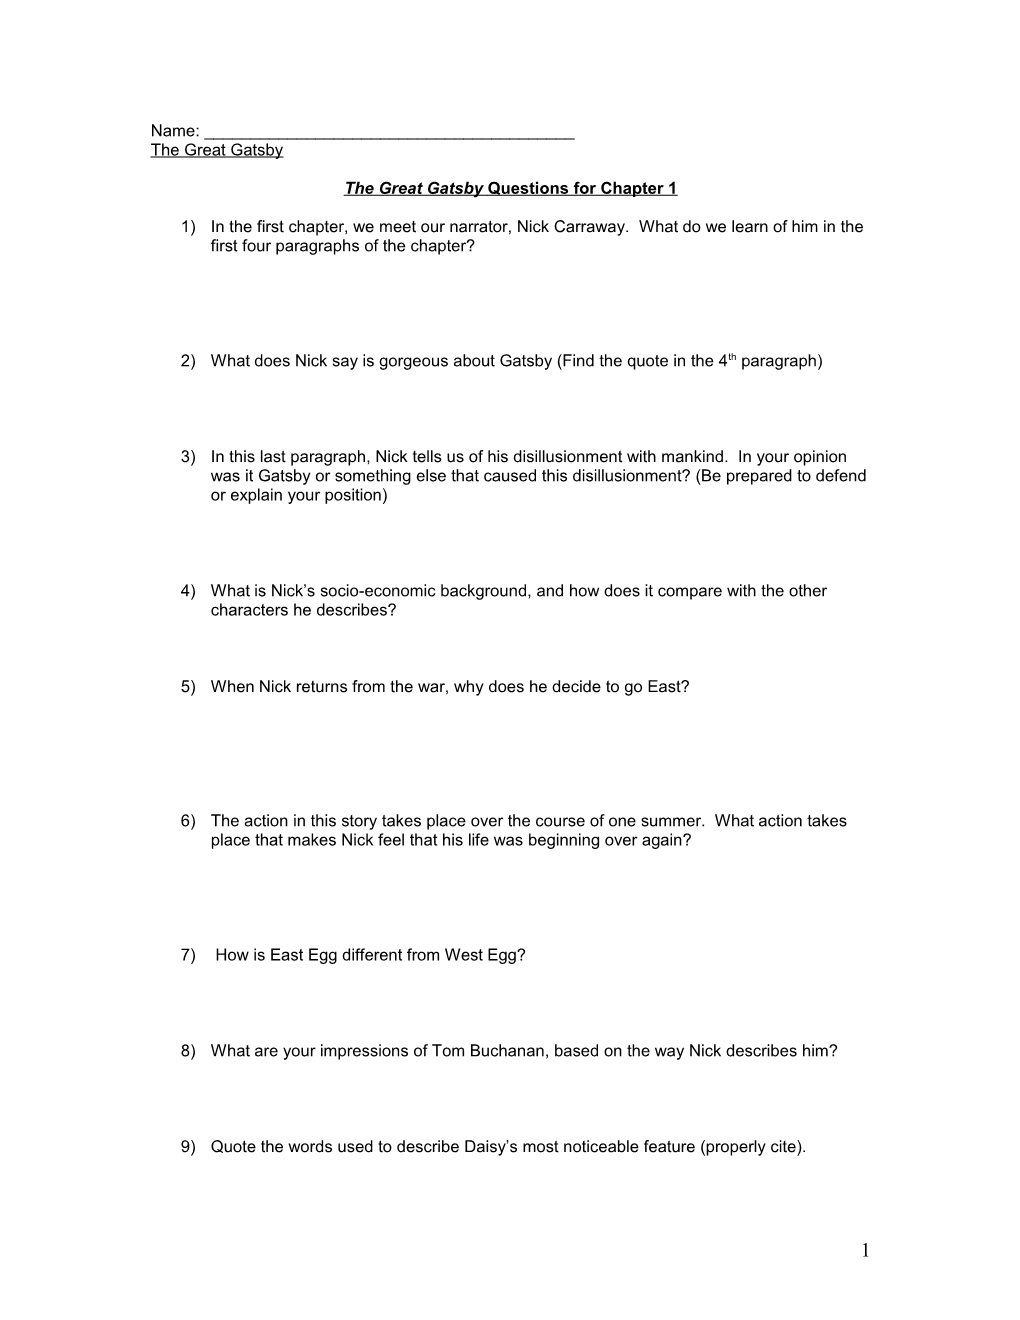 The Great Gatsby Questions for Chapter 1